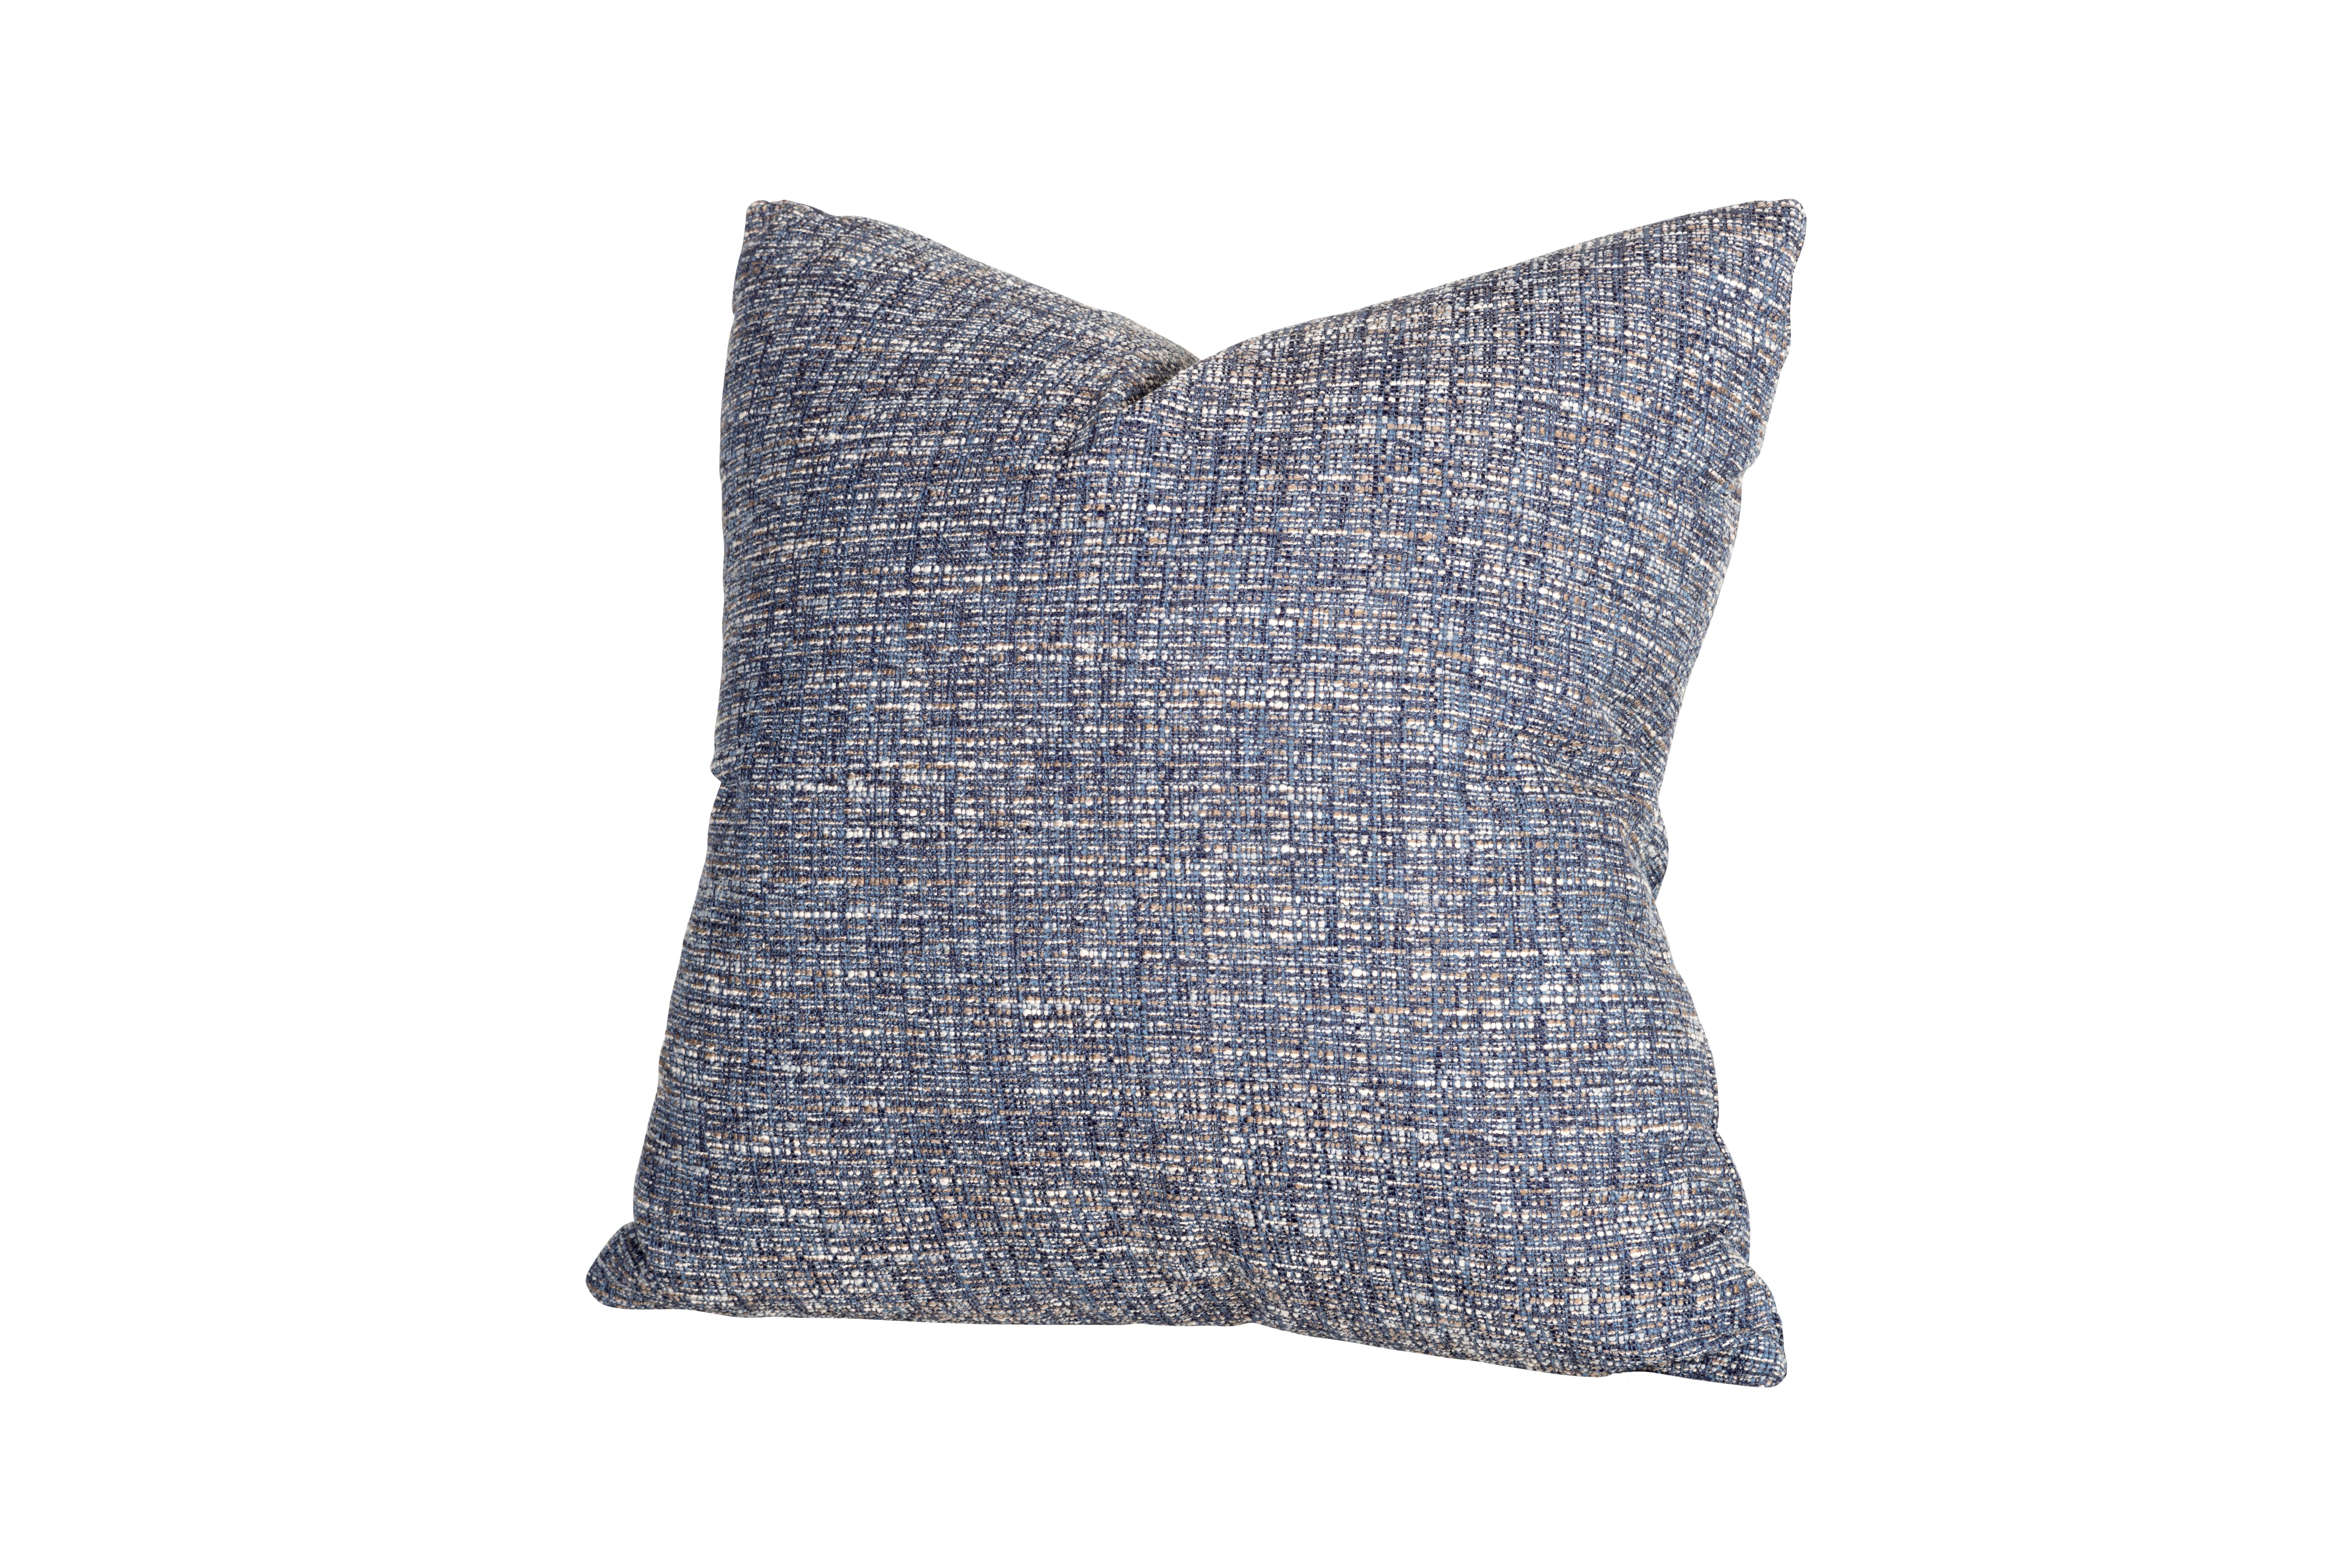 Frameworks by Brendan Bass Pillow in Blue Multi Tweed Vintage Fabric. Down Fill. 